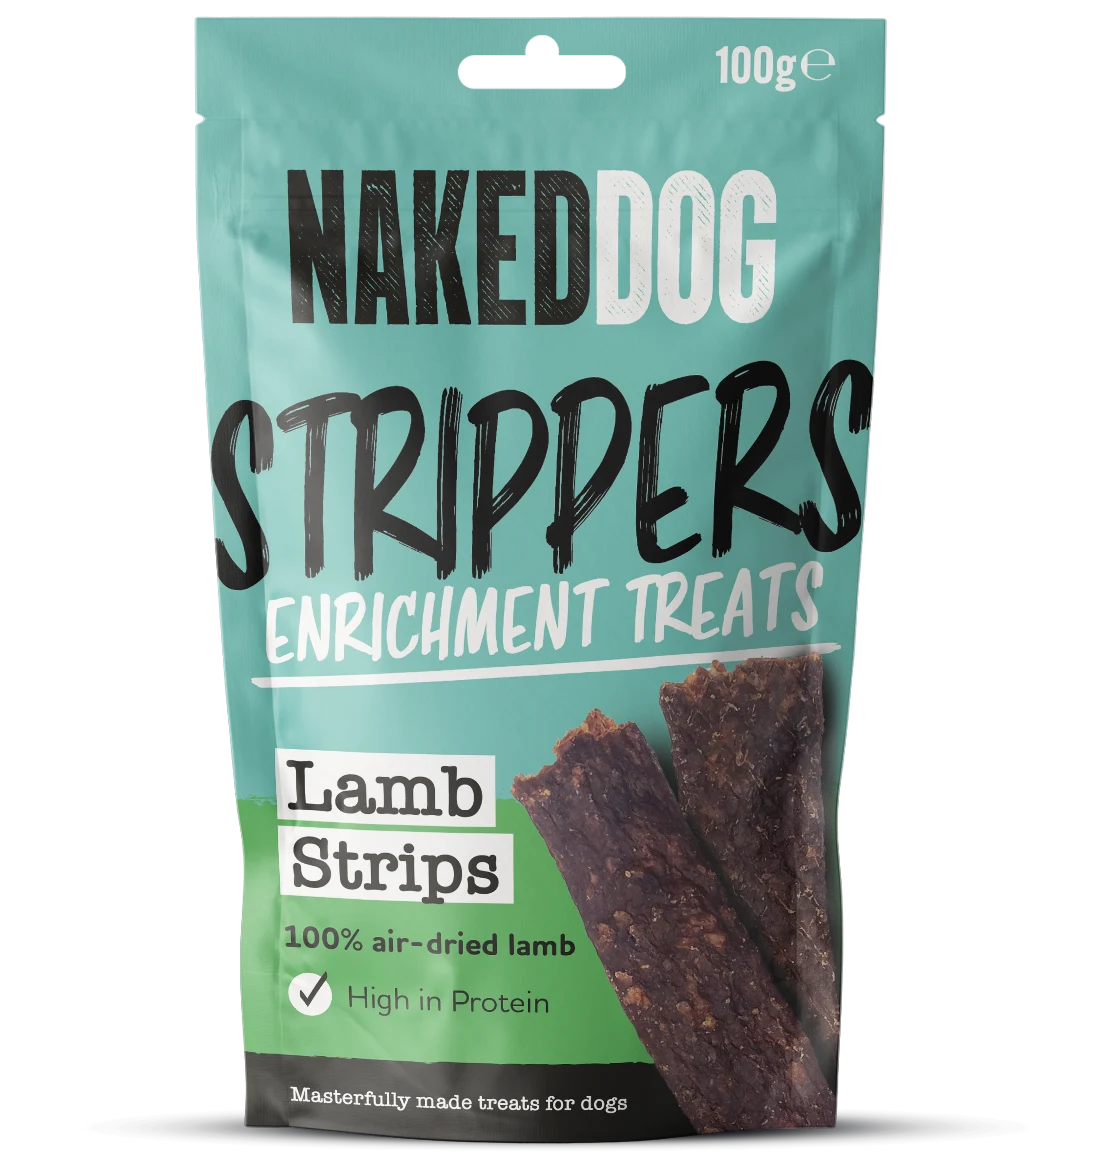 Naked Dog STRIPPERS Enrichment Treats 100g - Lamb (Case of 6)